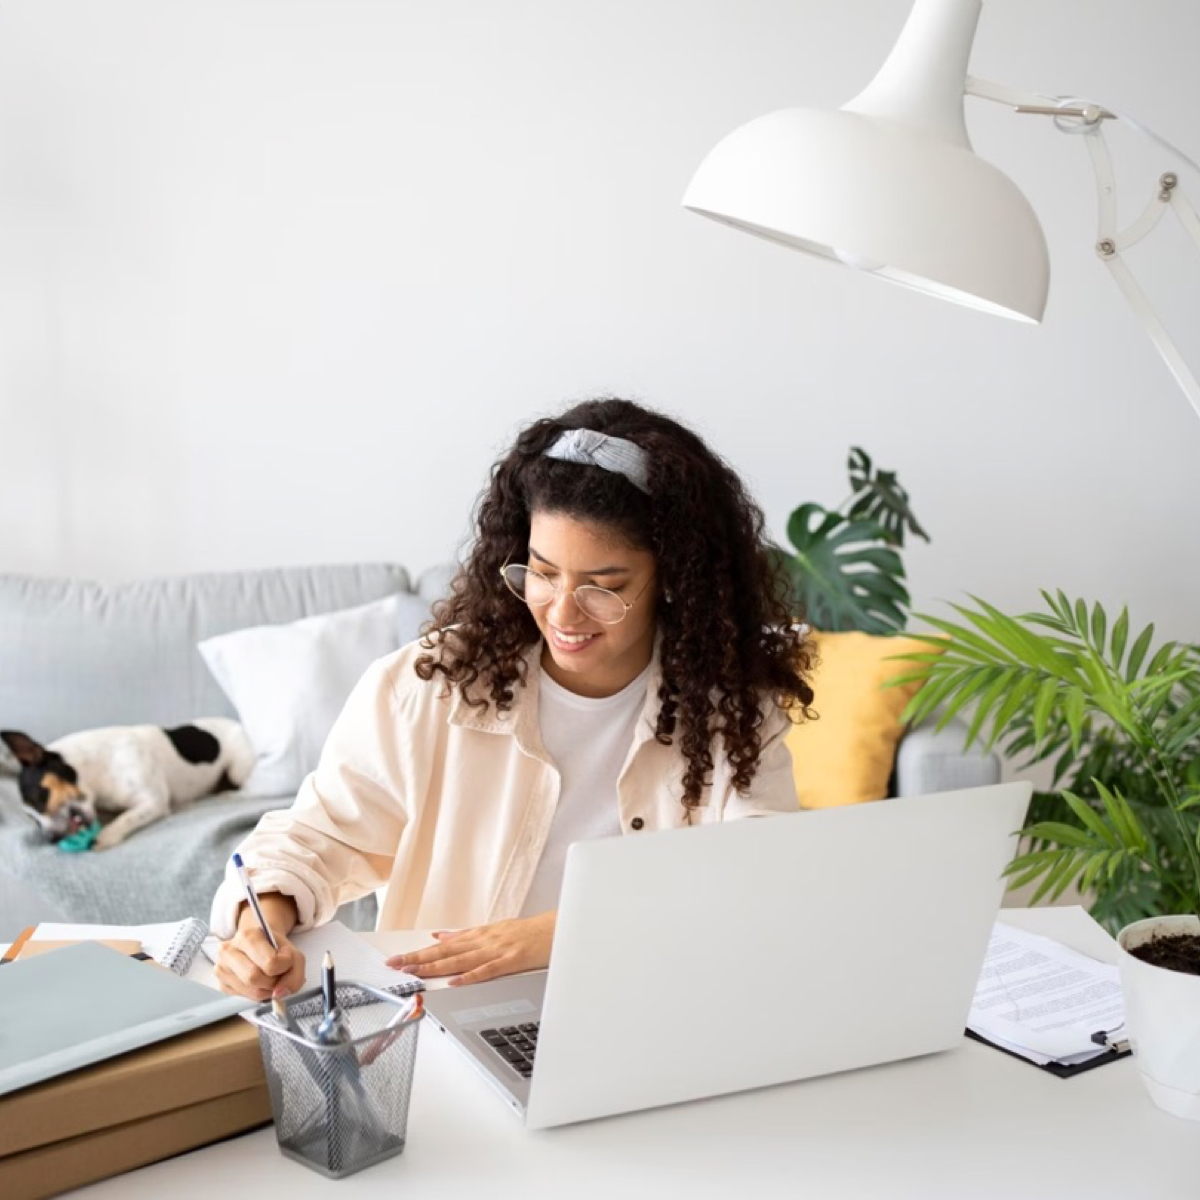 The Impact of Remote Work on Employee Engagement